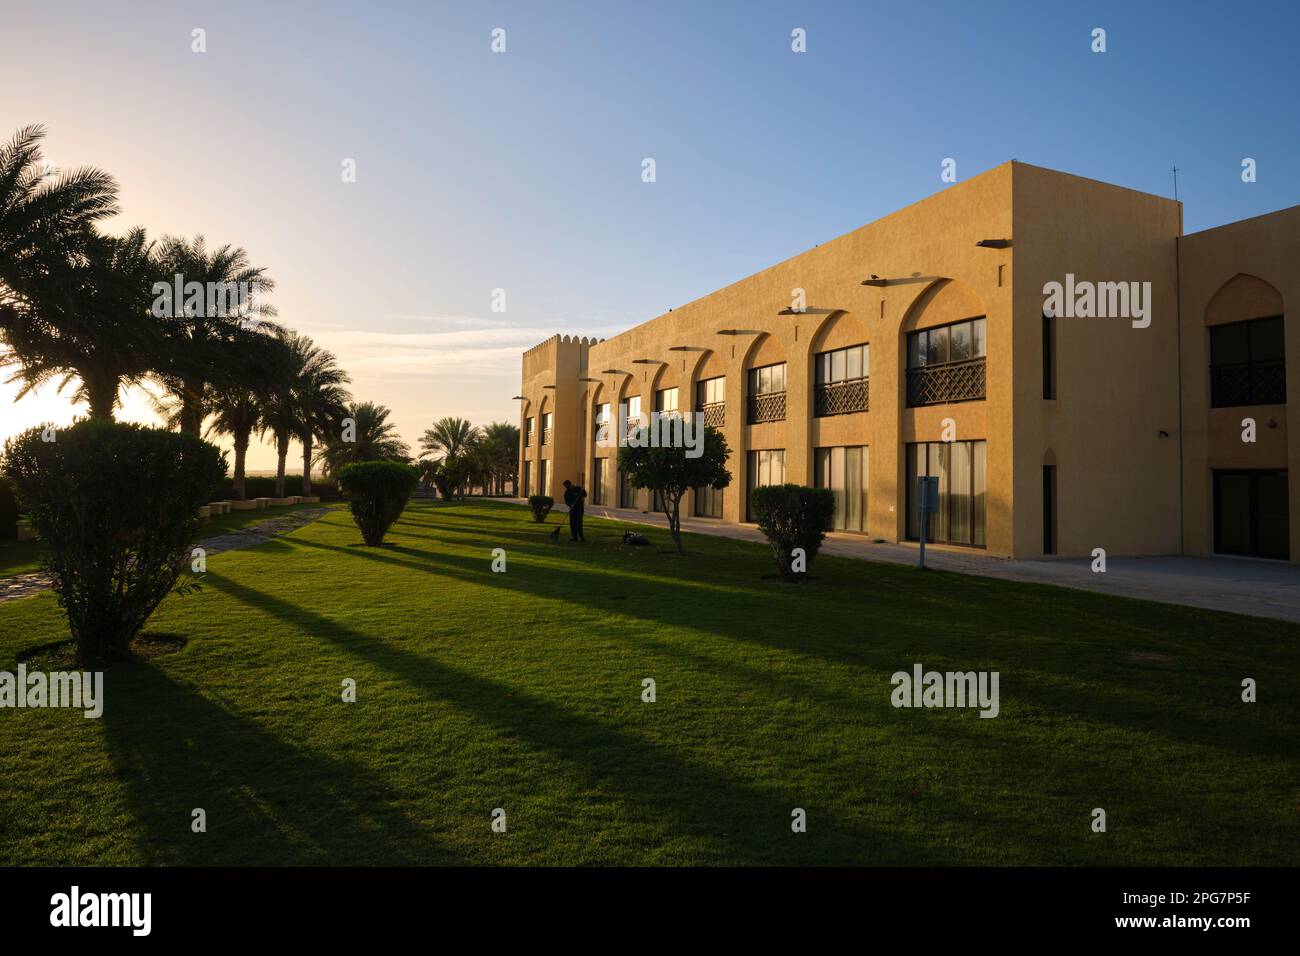 Morning sunrise on the hotel building grounds. A worker grooms the lawn. At the Tilal Liwa Hotel desert vacation resort near Abu Dhabi, UAE, United Ar Stock Photo